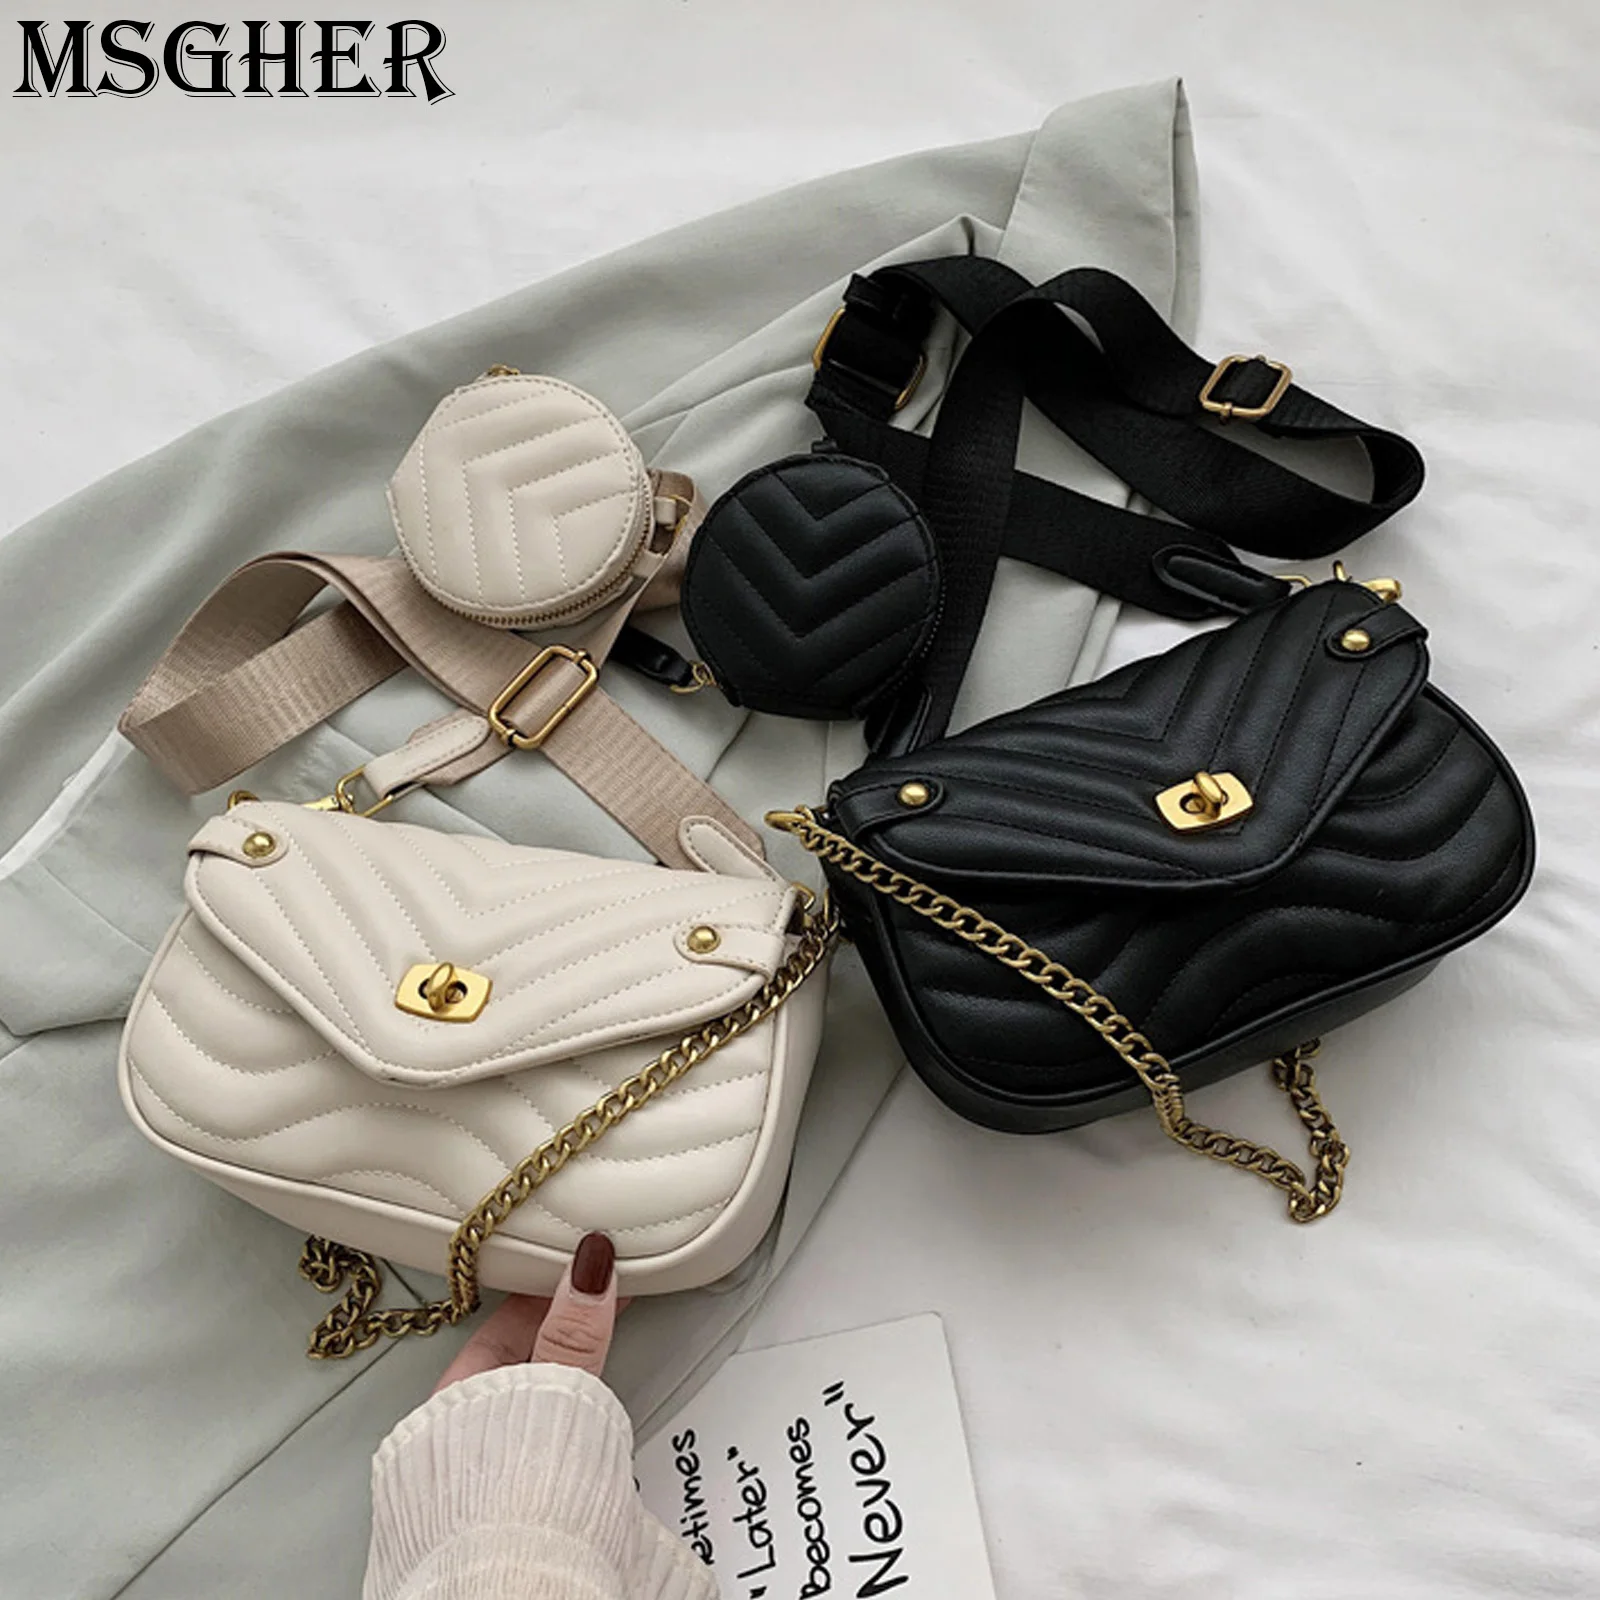 

Small Crossbody Purses for Women Pu Leather Chain Quilted Handbag Designer Shoulder Bags Mini Coin Cellphone Purse Set 2pcs B072